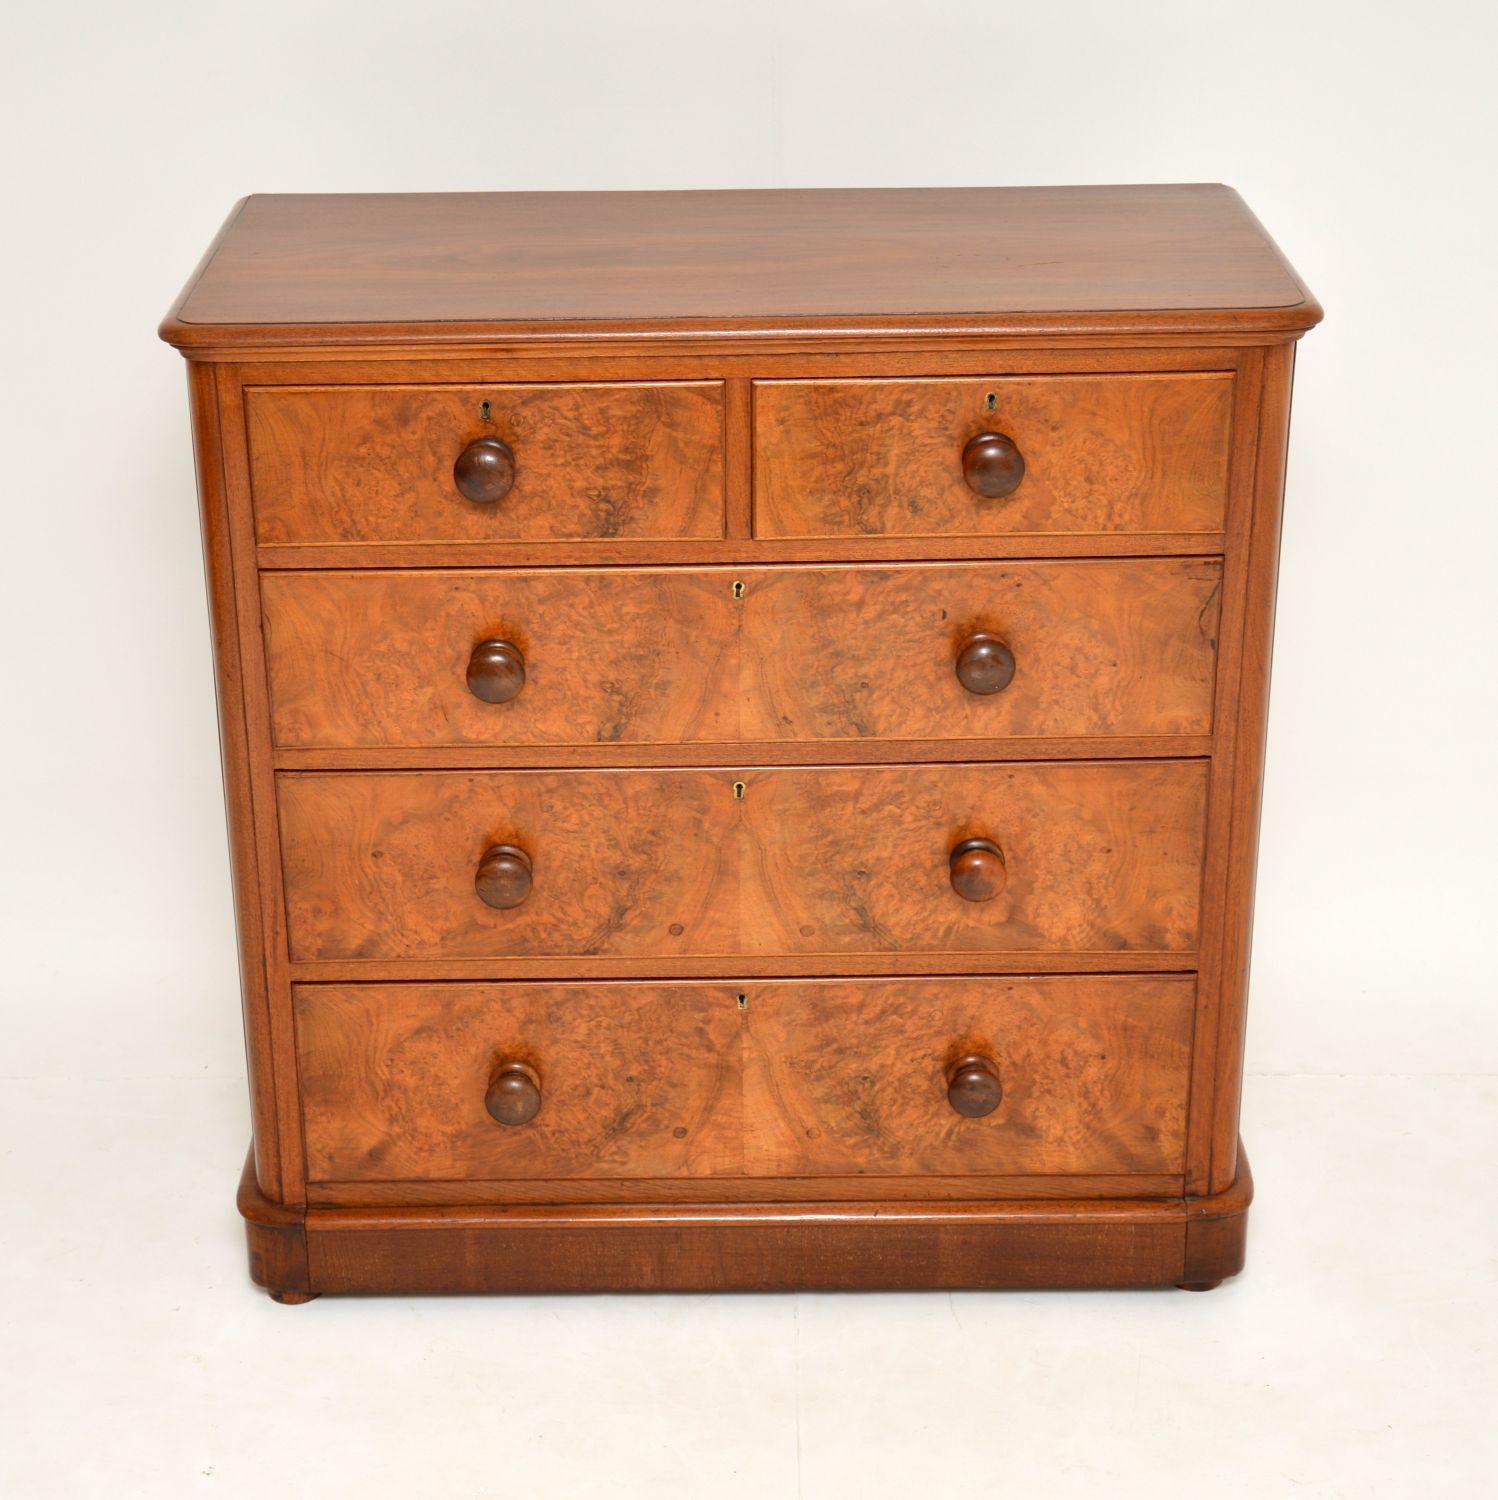 This antique Victorian burr walnut chest of drawers is a very fine example of this kind of model and has a lovely warm mellow color. The pattern of the burr walnut running through all the drawers is beautiful and the overall quality is